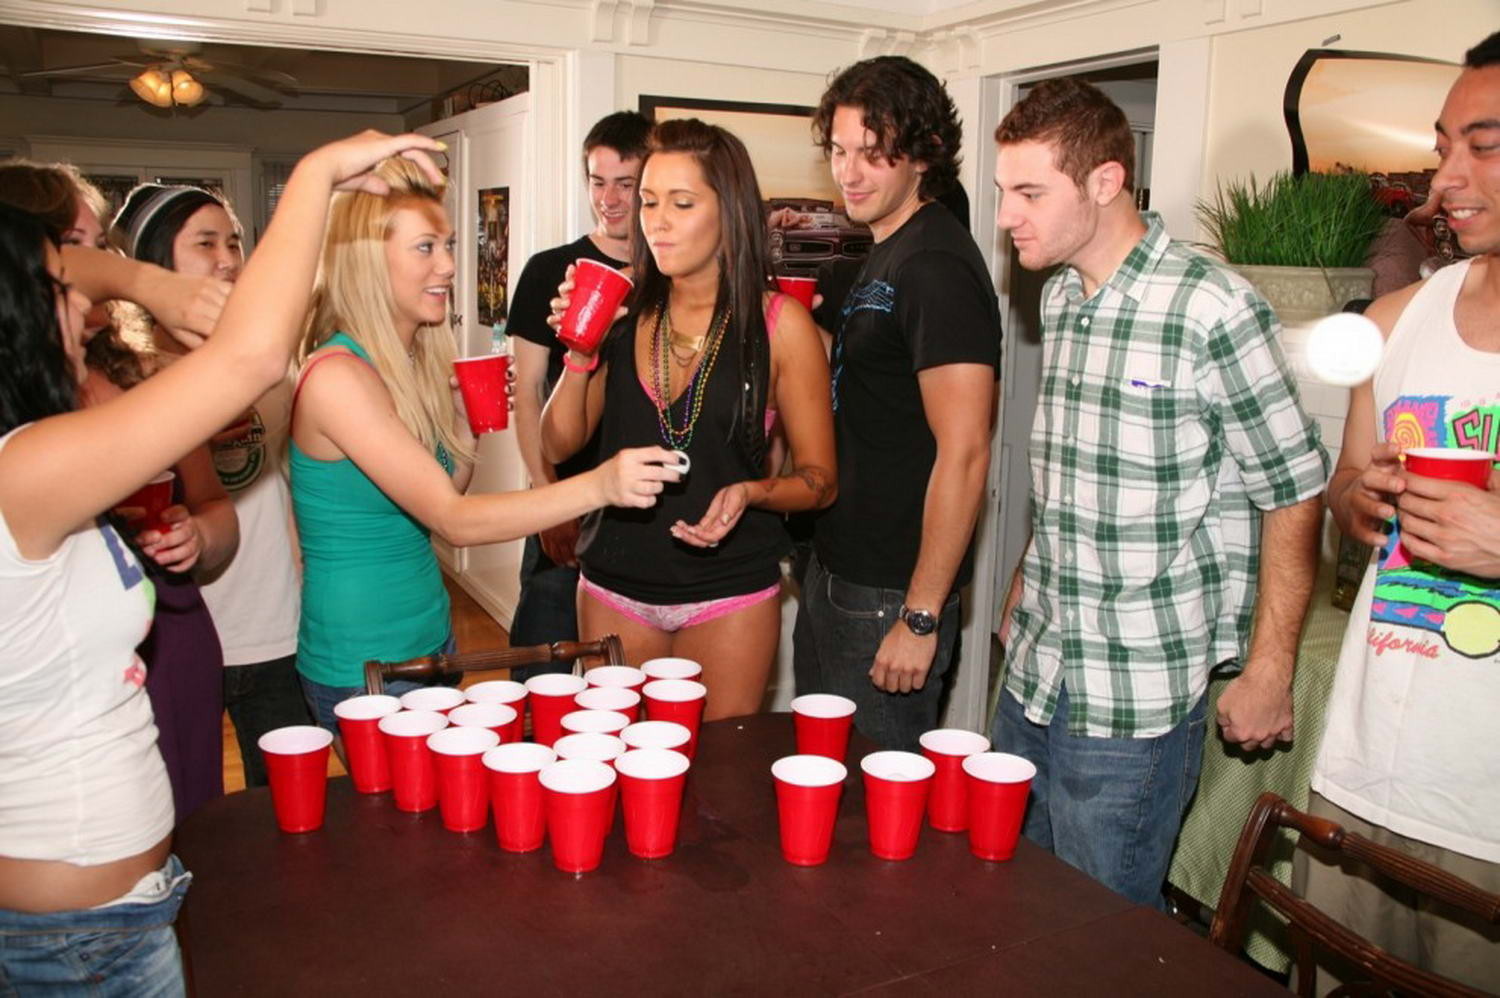 Beer Pong Party Turns Into a Sex Orgy #68157425